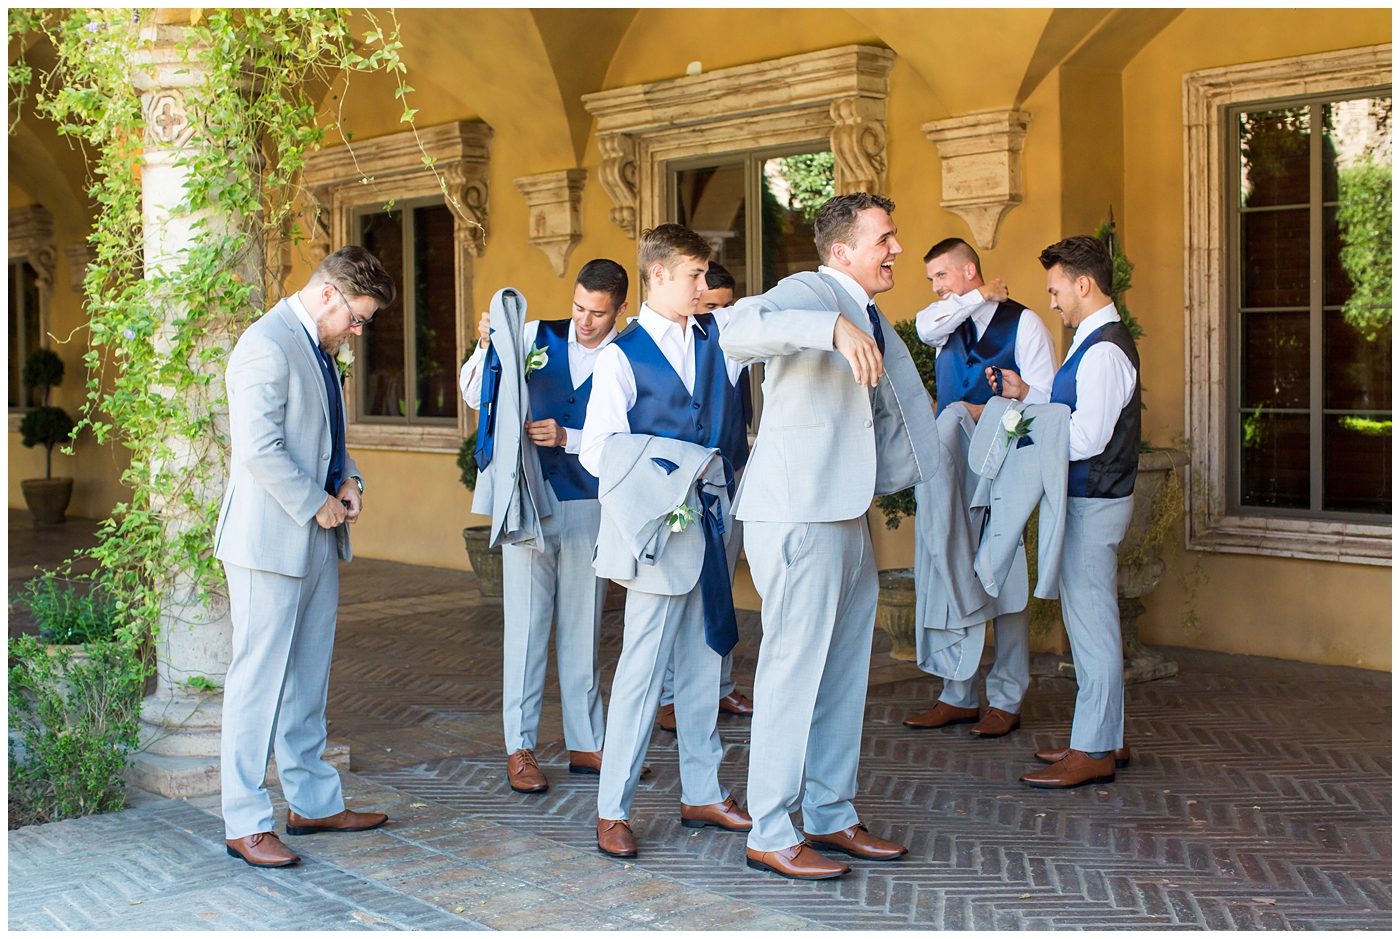 groom in grey suit with blue tie and white rose boutonniere and groomsmen in grey suits with royal blue vests and ties getting ready on wedding day